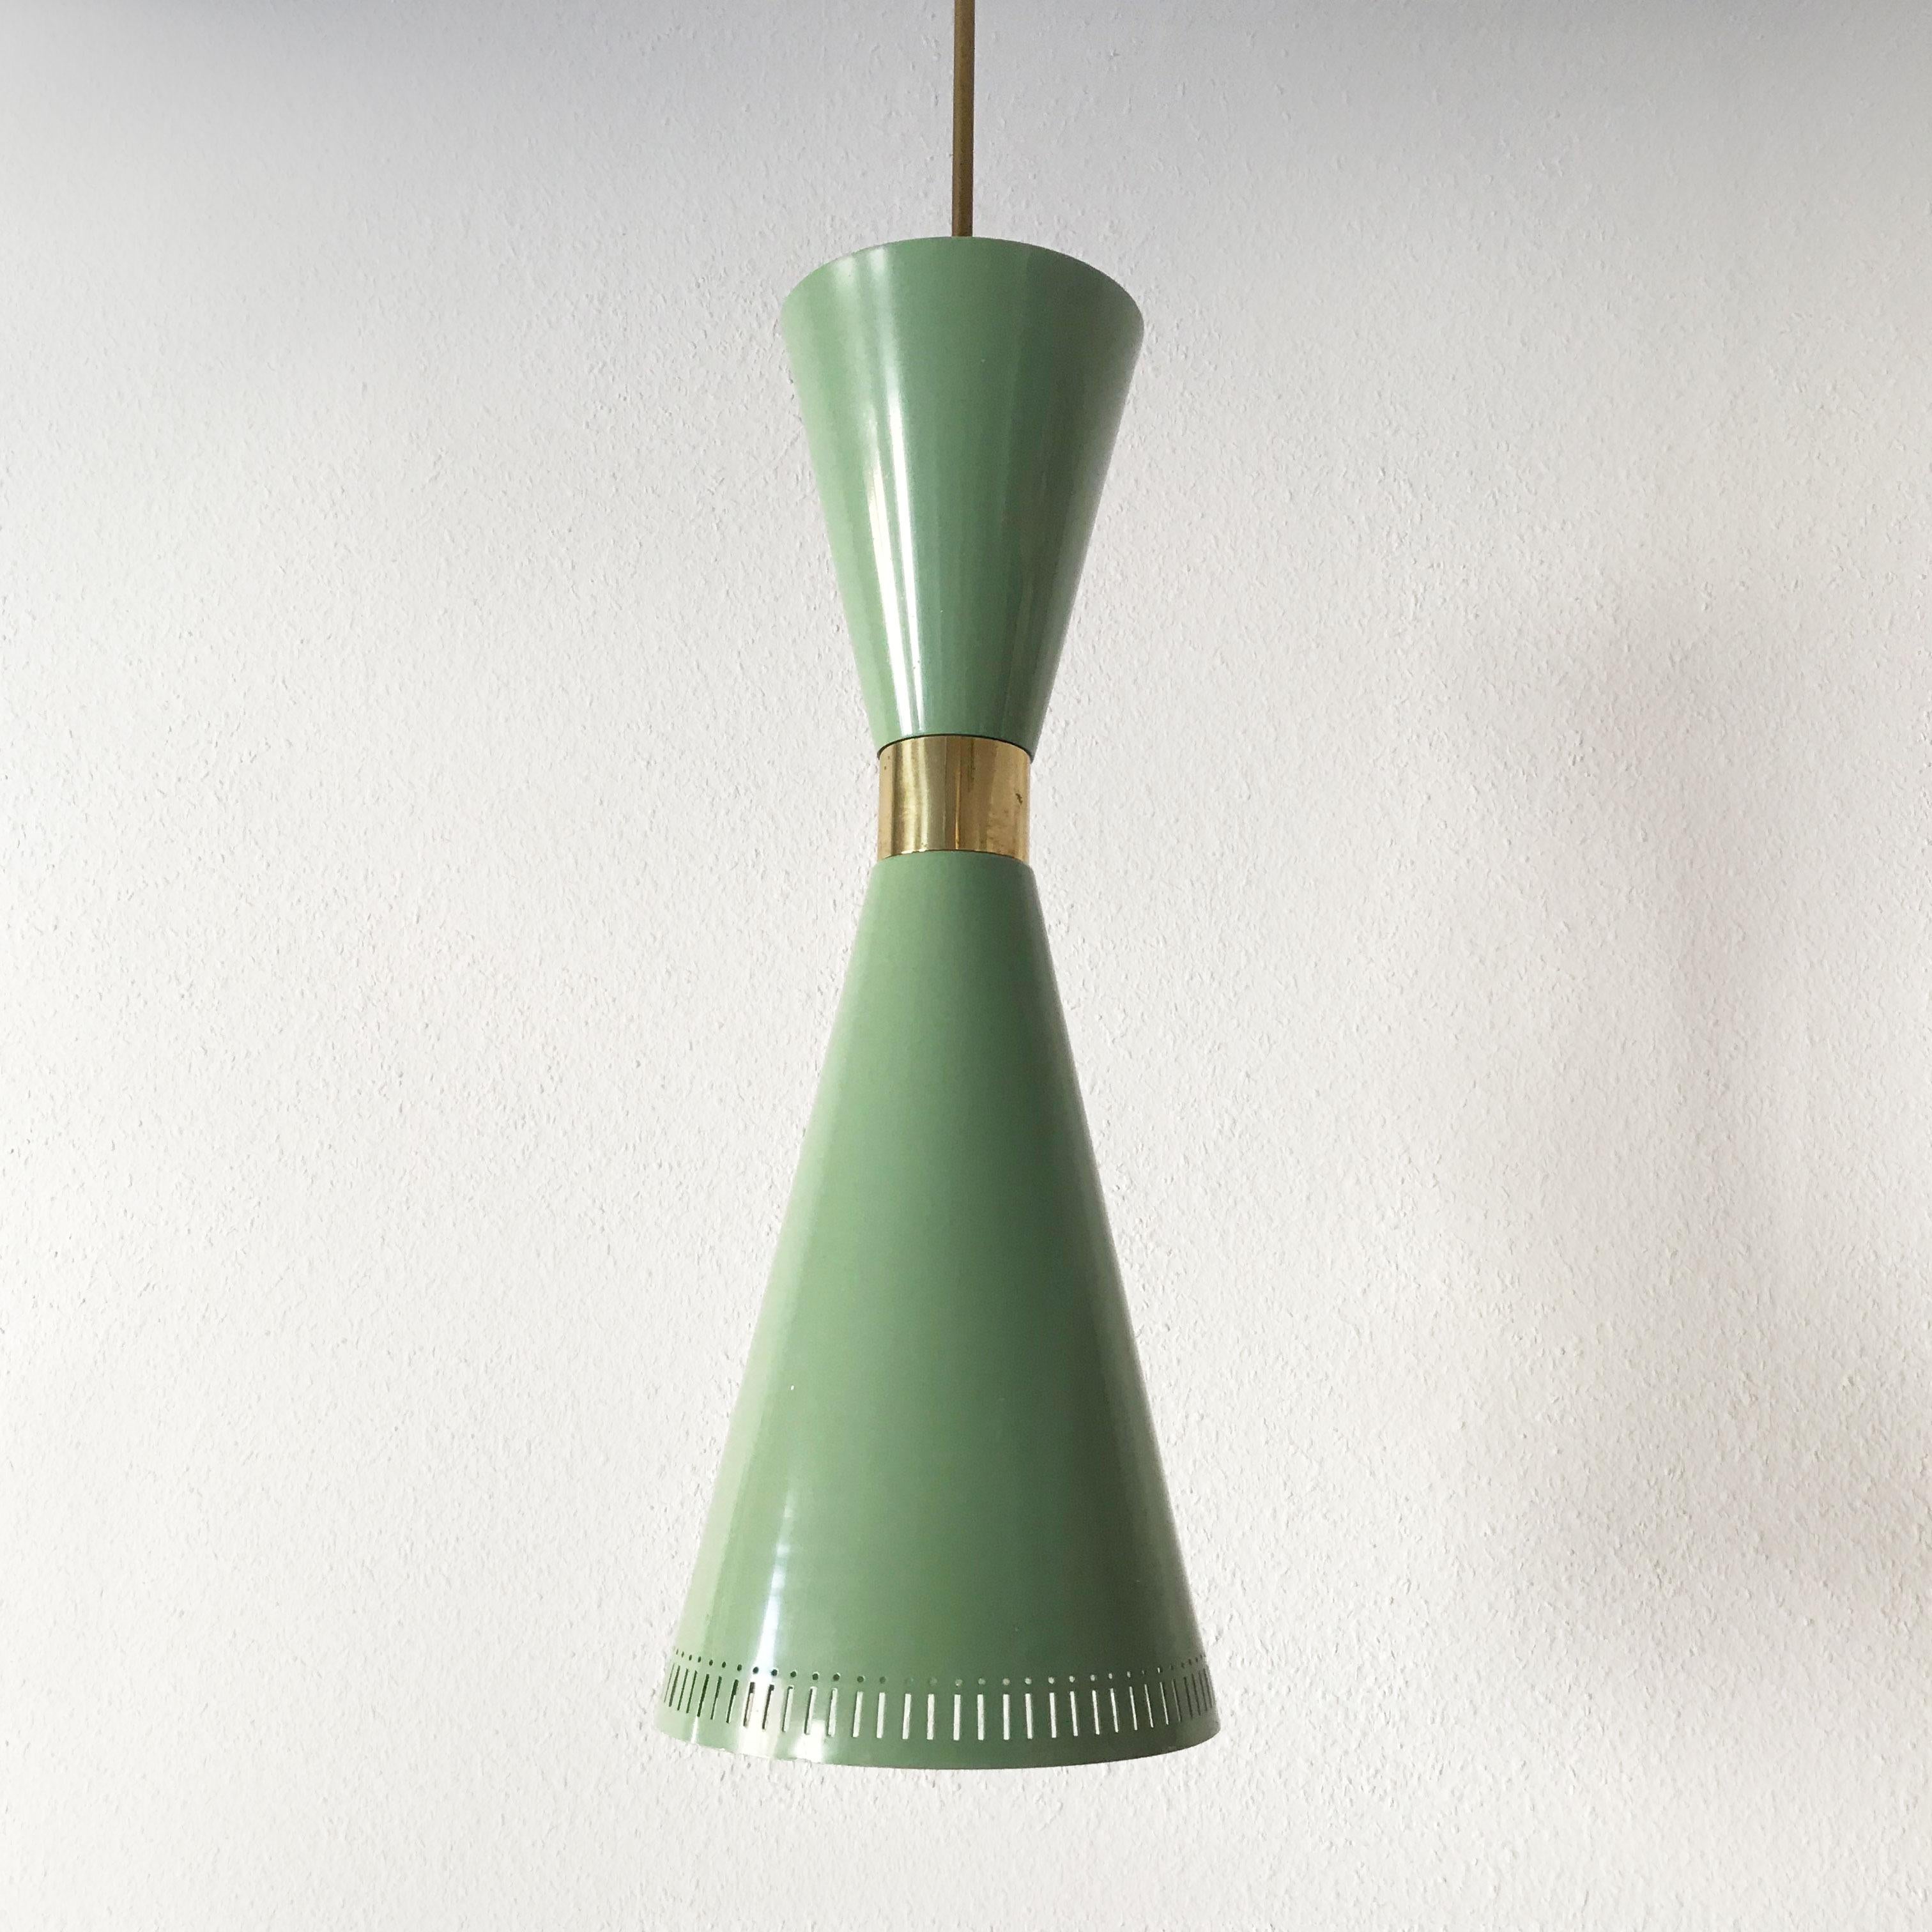 Exceptional Mid-Century Modern Large Diabolo Pendant Lamp by BAG Turgi, 1950s 7